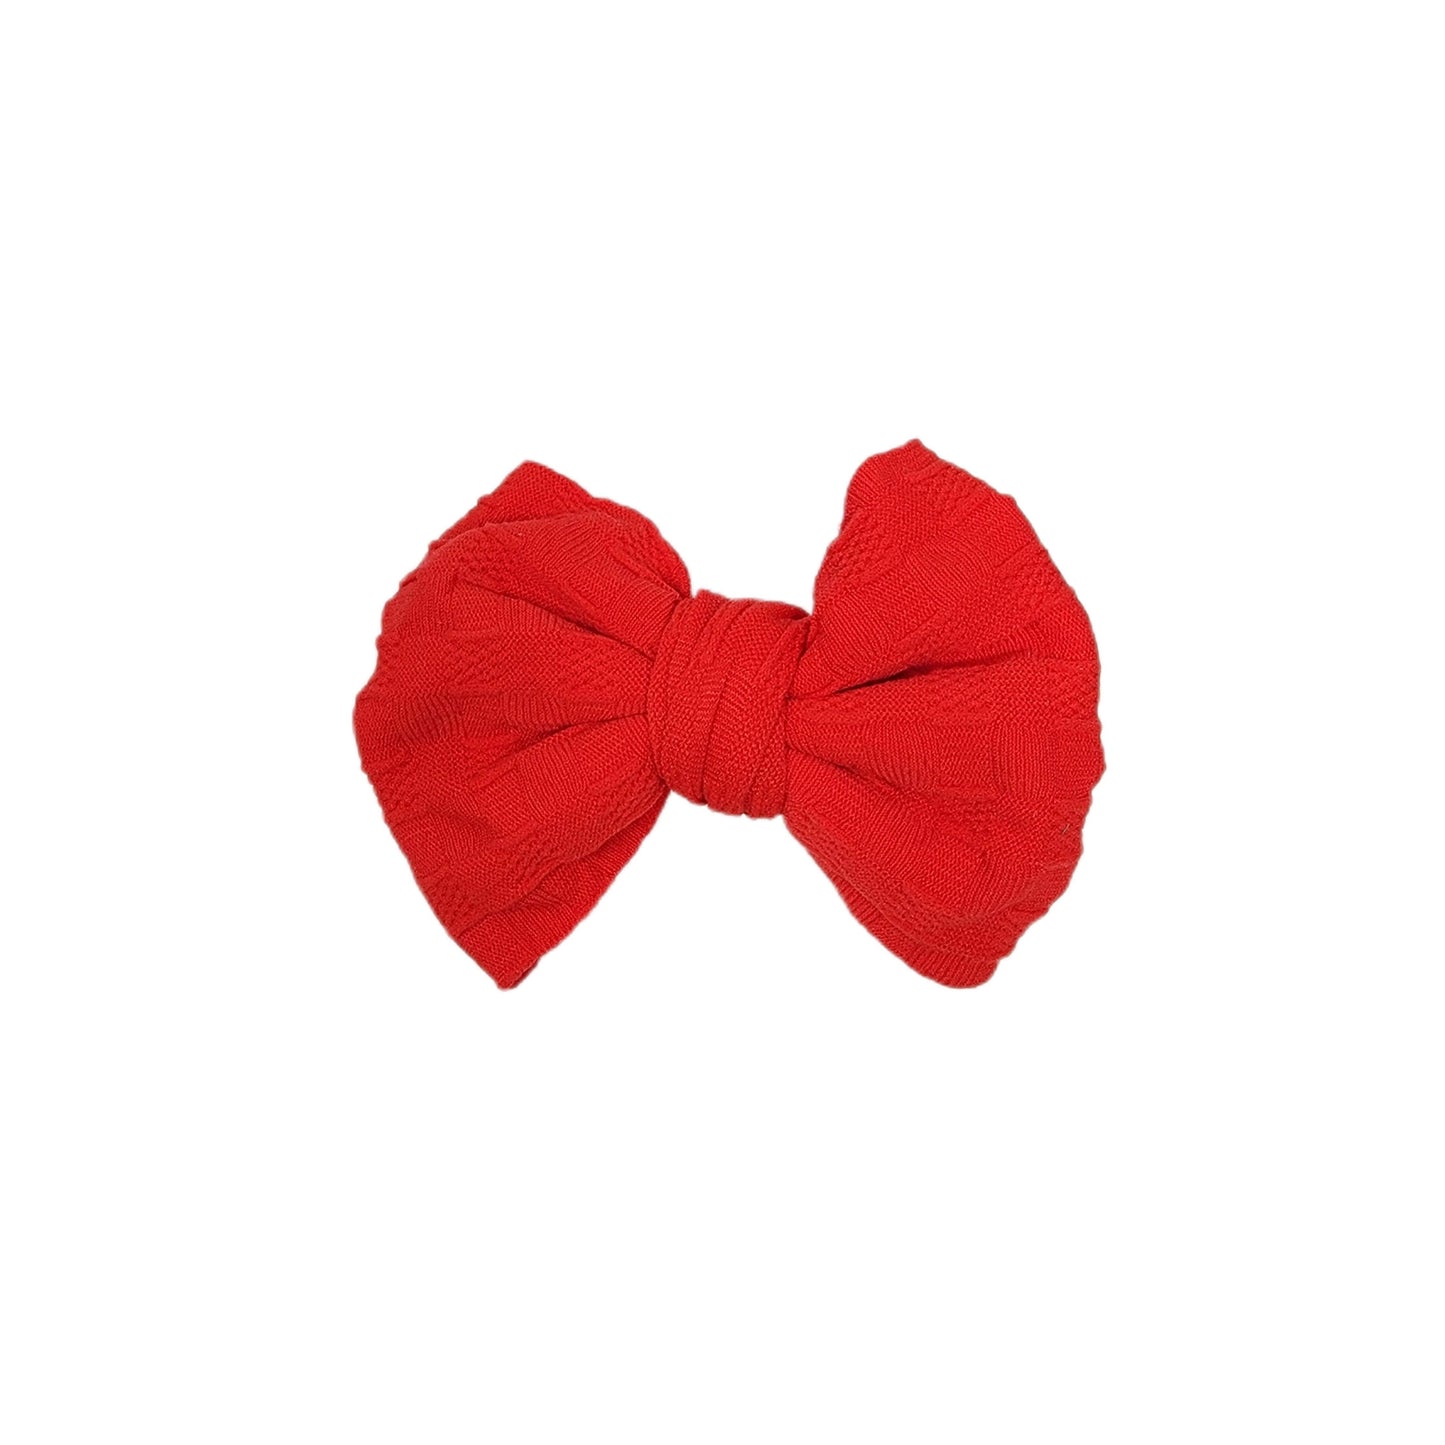 Red Woven Knit Fabric Bow 4" 